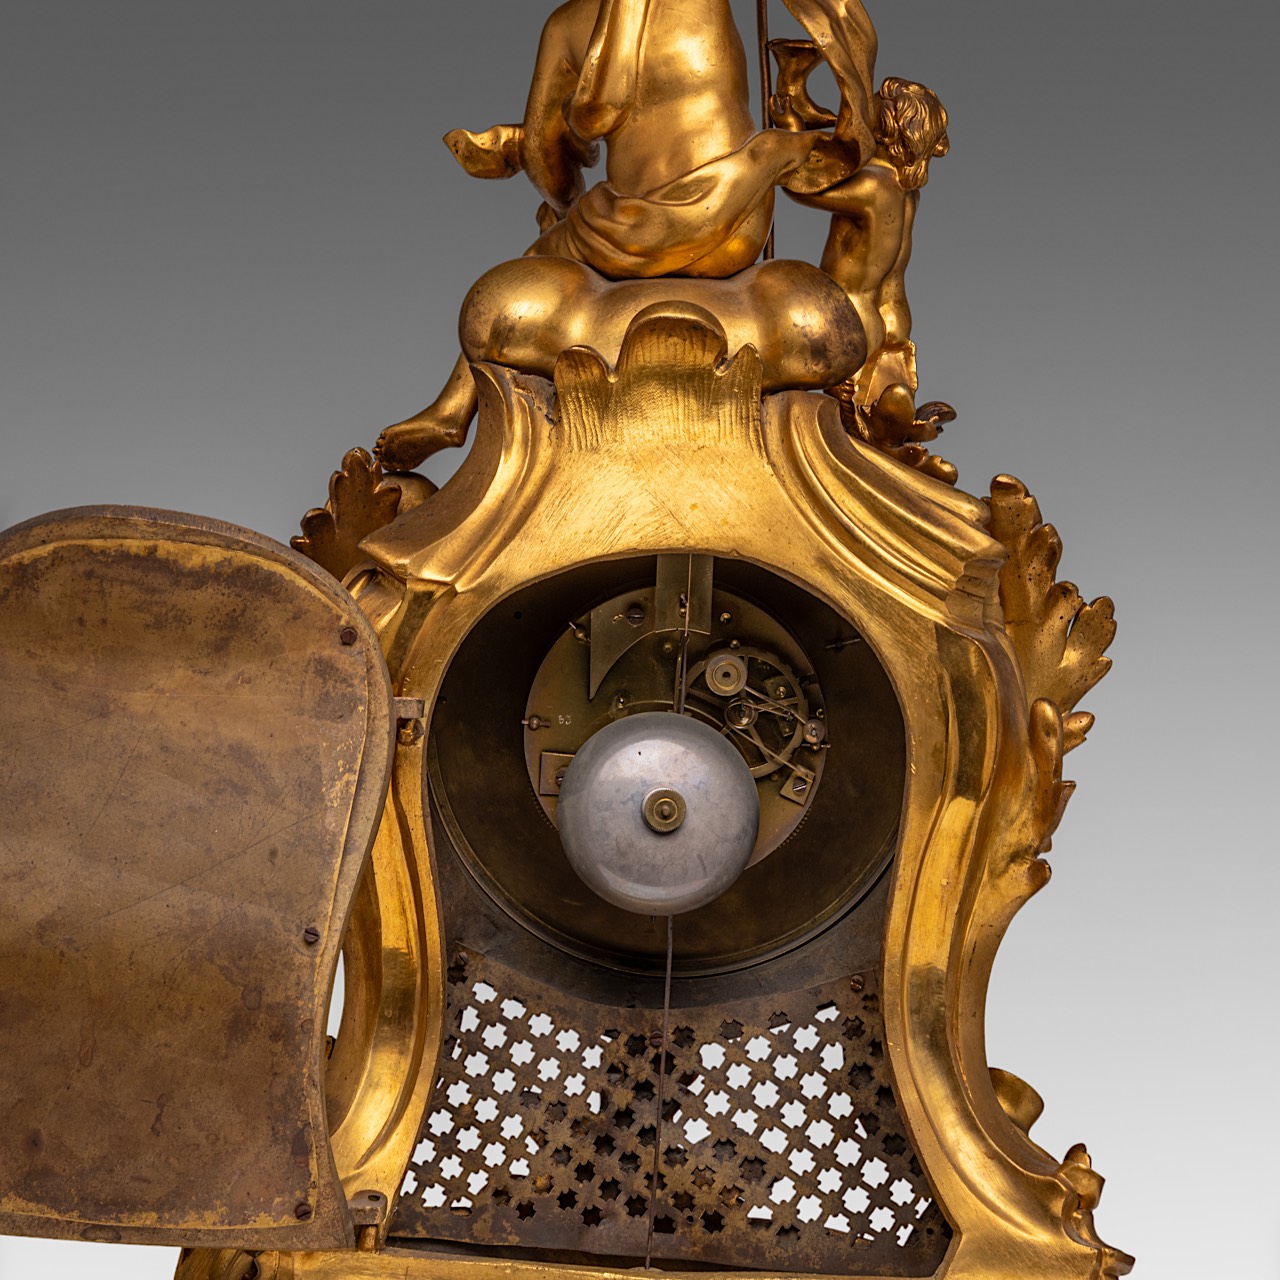 A Rococo Revival gilt bronze mantle clock, decorated with Neptune, Ferdinand Berthoud, H 71 cm - Image 8 of 9